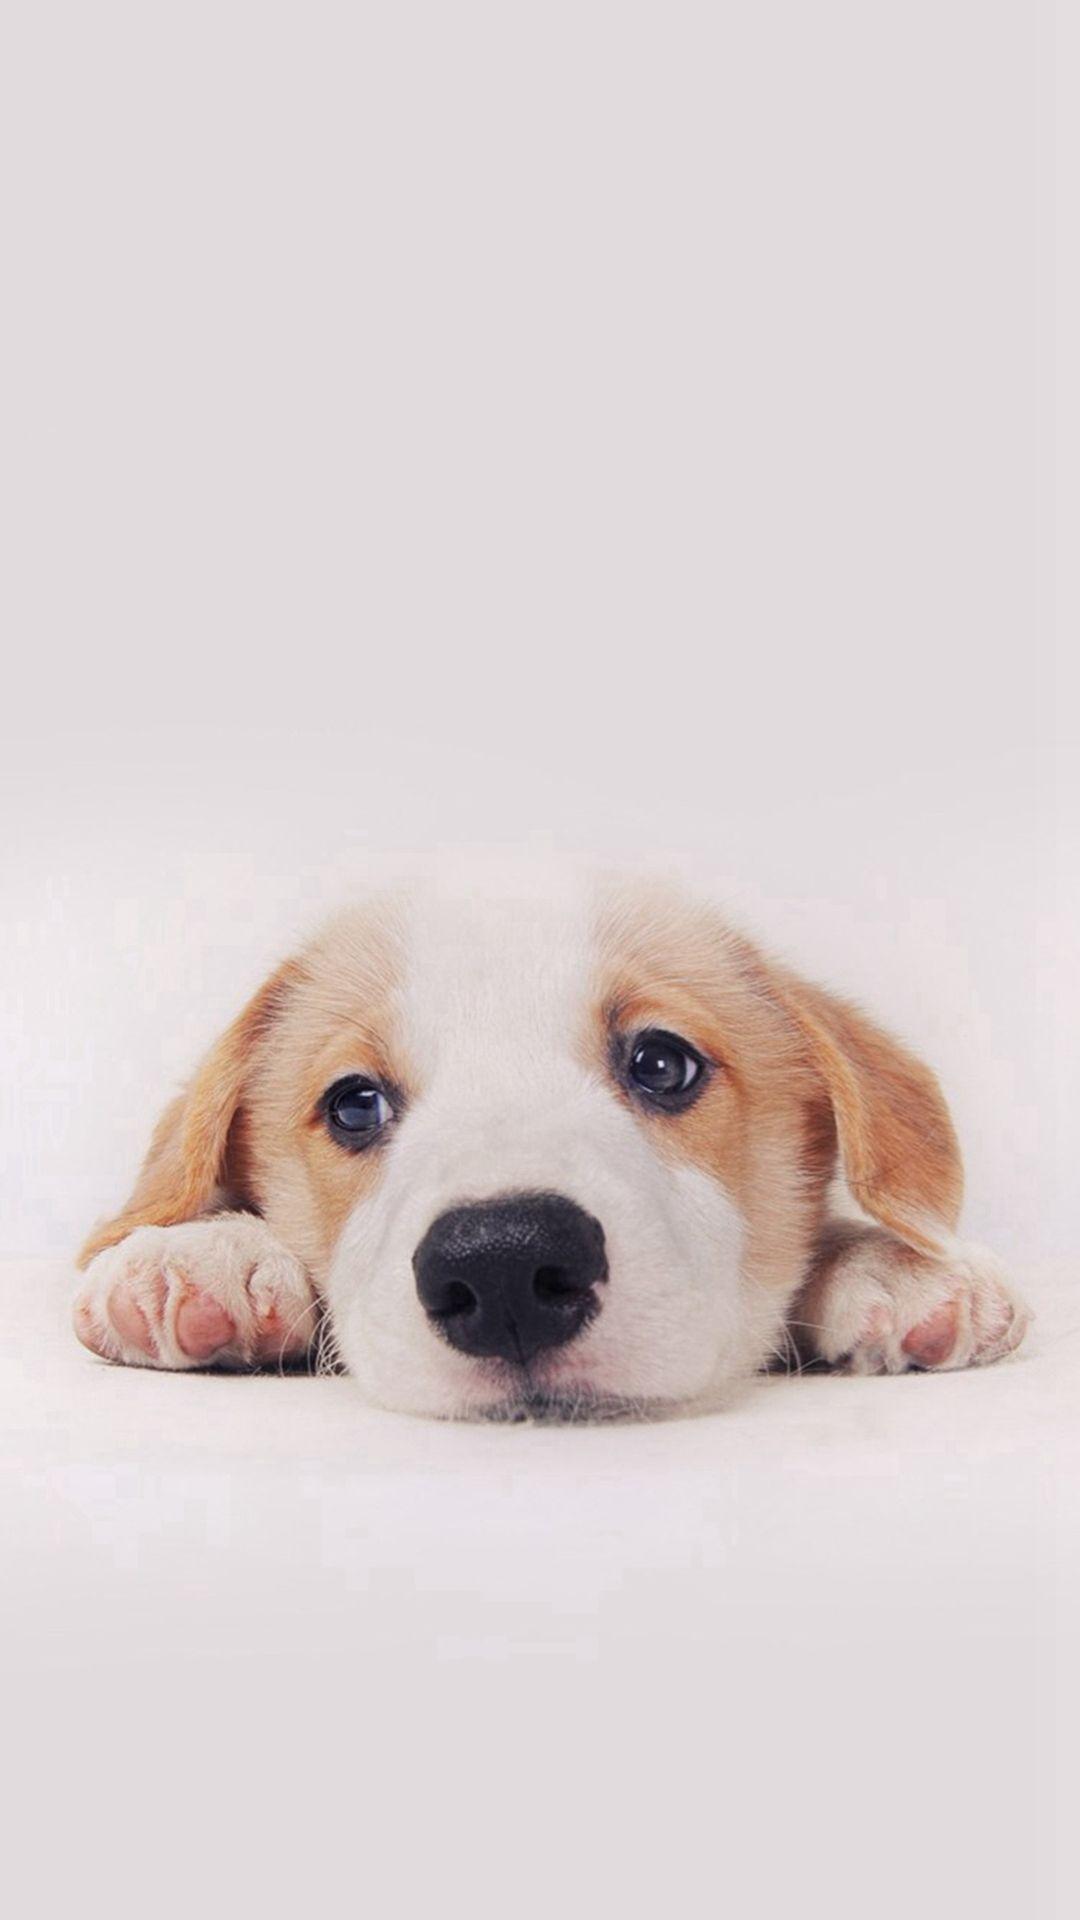 1080x1920 Cute Puppy iPhone Wallpapers Top Free Cute Puppy iPhone Backgrounds